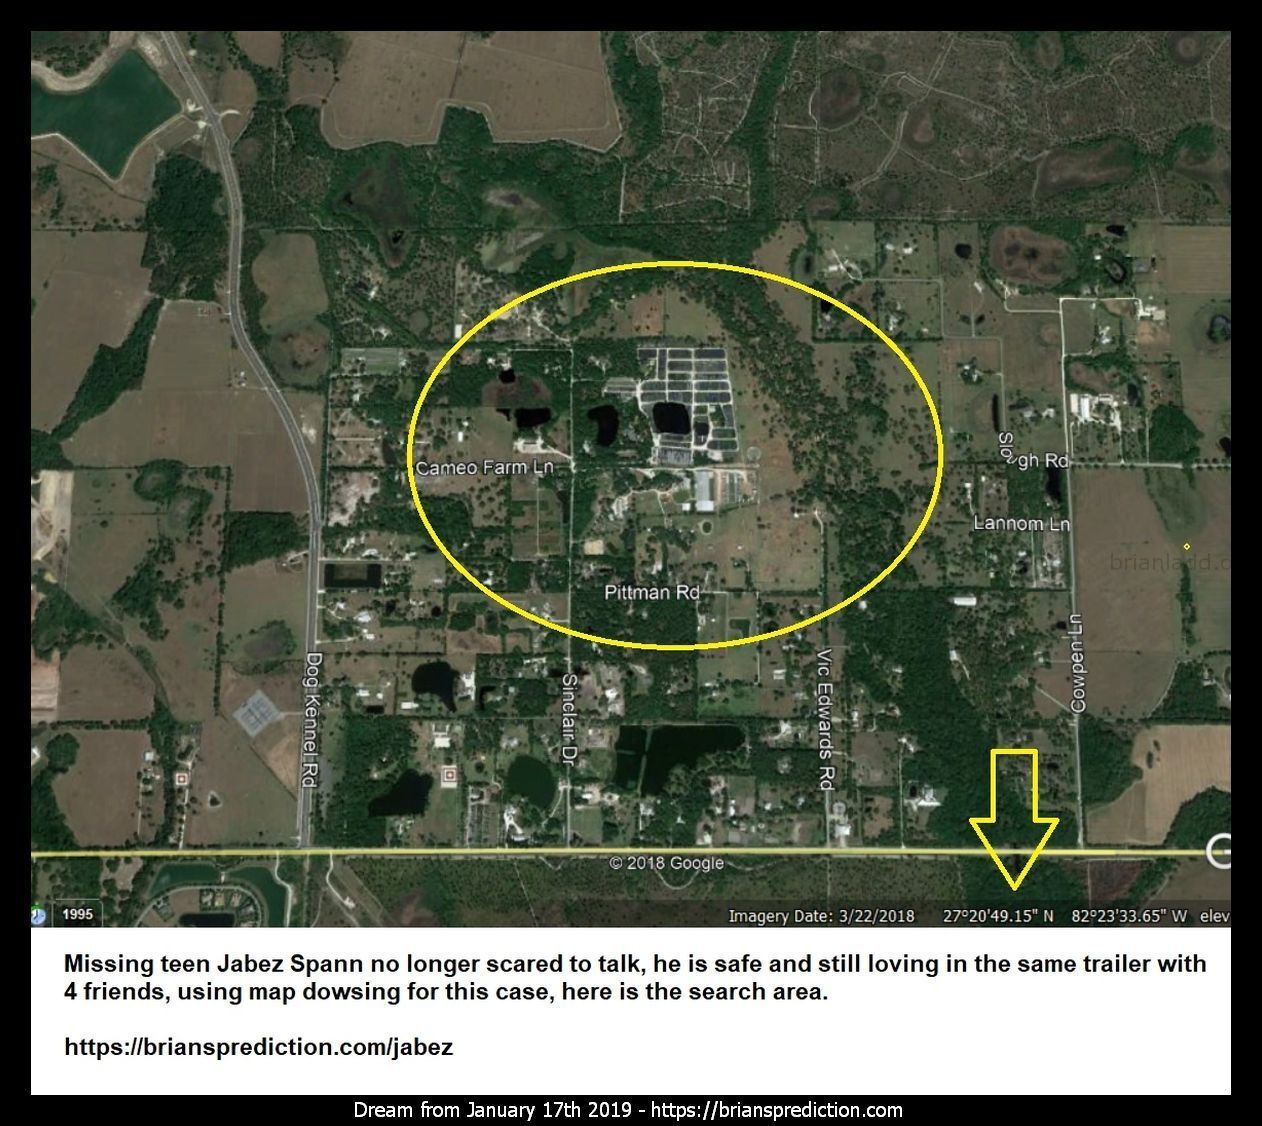 11594 17 January 2019 8 - Missing Teen Jabez Spann No Longer Scared To Talk, He Is Safe And Still Loving In The Same Tra...
Missing Teen Jabez Spann No Longer Scared To Talk, He Is Safe And Still Loving In The Same Trailer With 4 Friends, Using Map Dowsing For This Case, Here Is The Search Area.  Dream Number 11594 17 January 2019 8 Psychic Prediction
